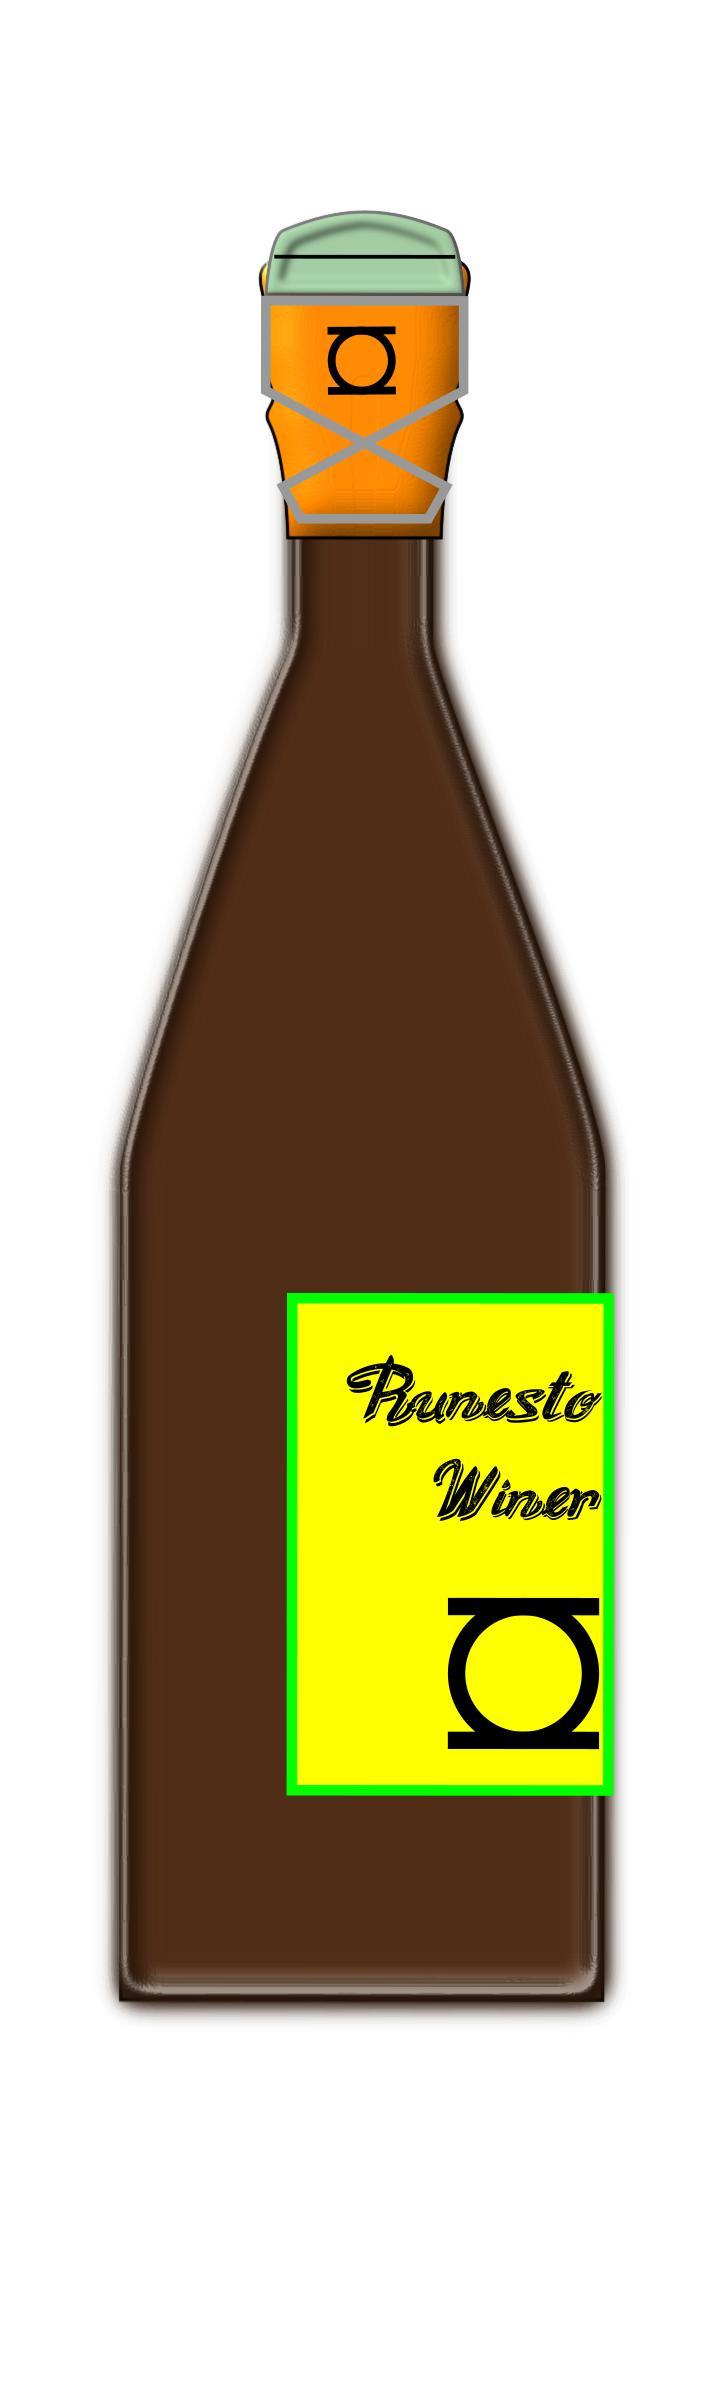 Champagne (standing) png transparent